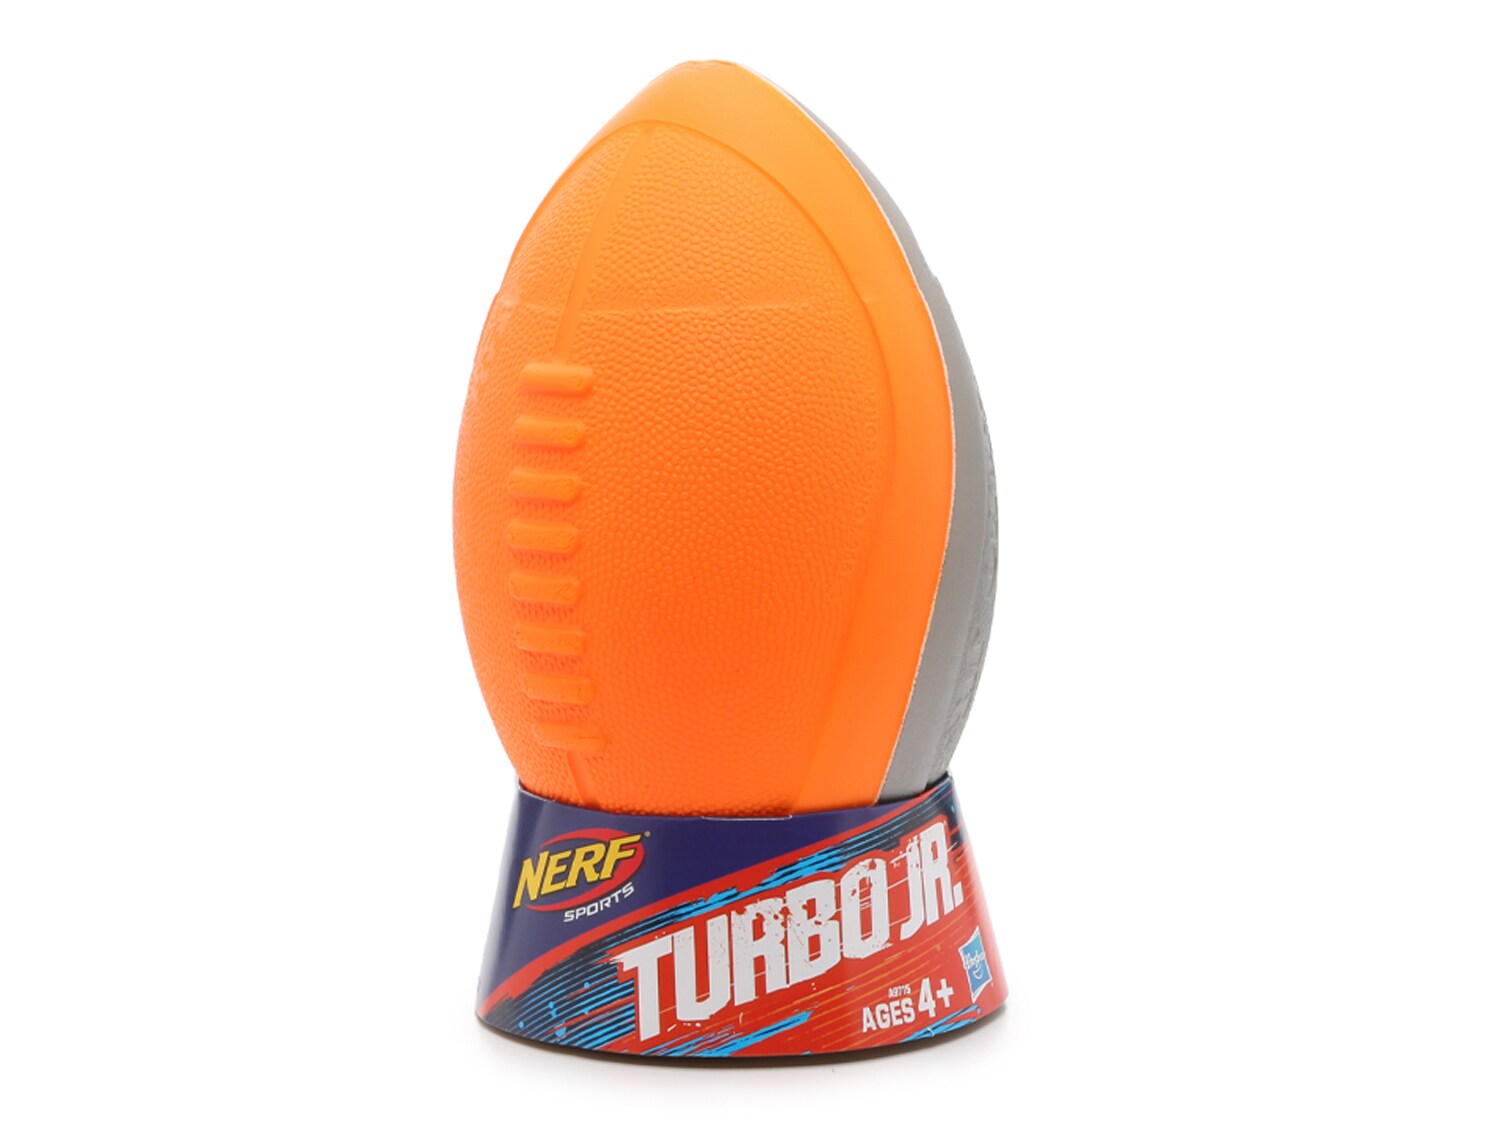 Football New in Package Orange & Gray Ball Hasbro Ages 4+ Nerf Sports Turbo Jr 